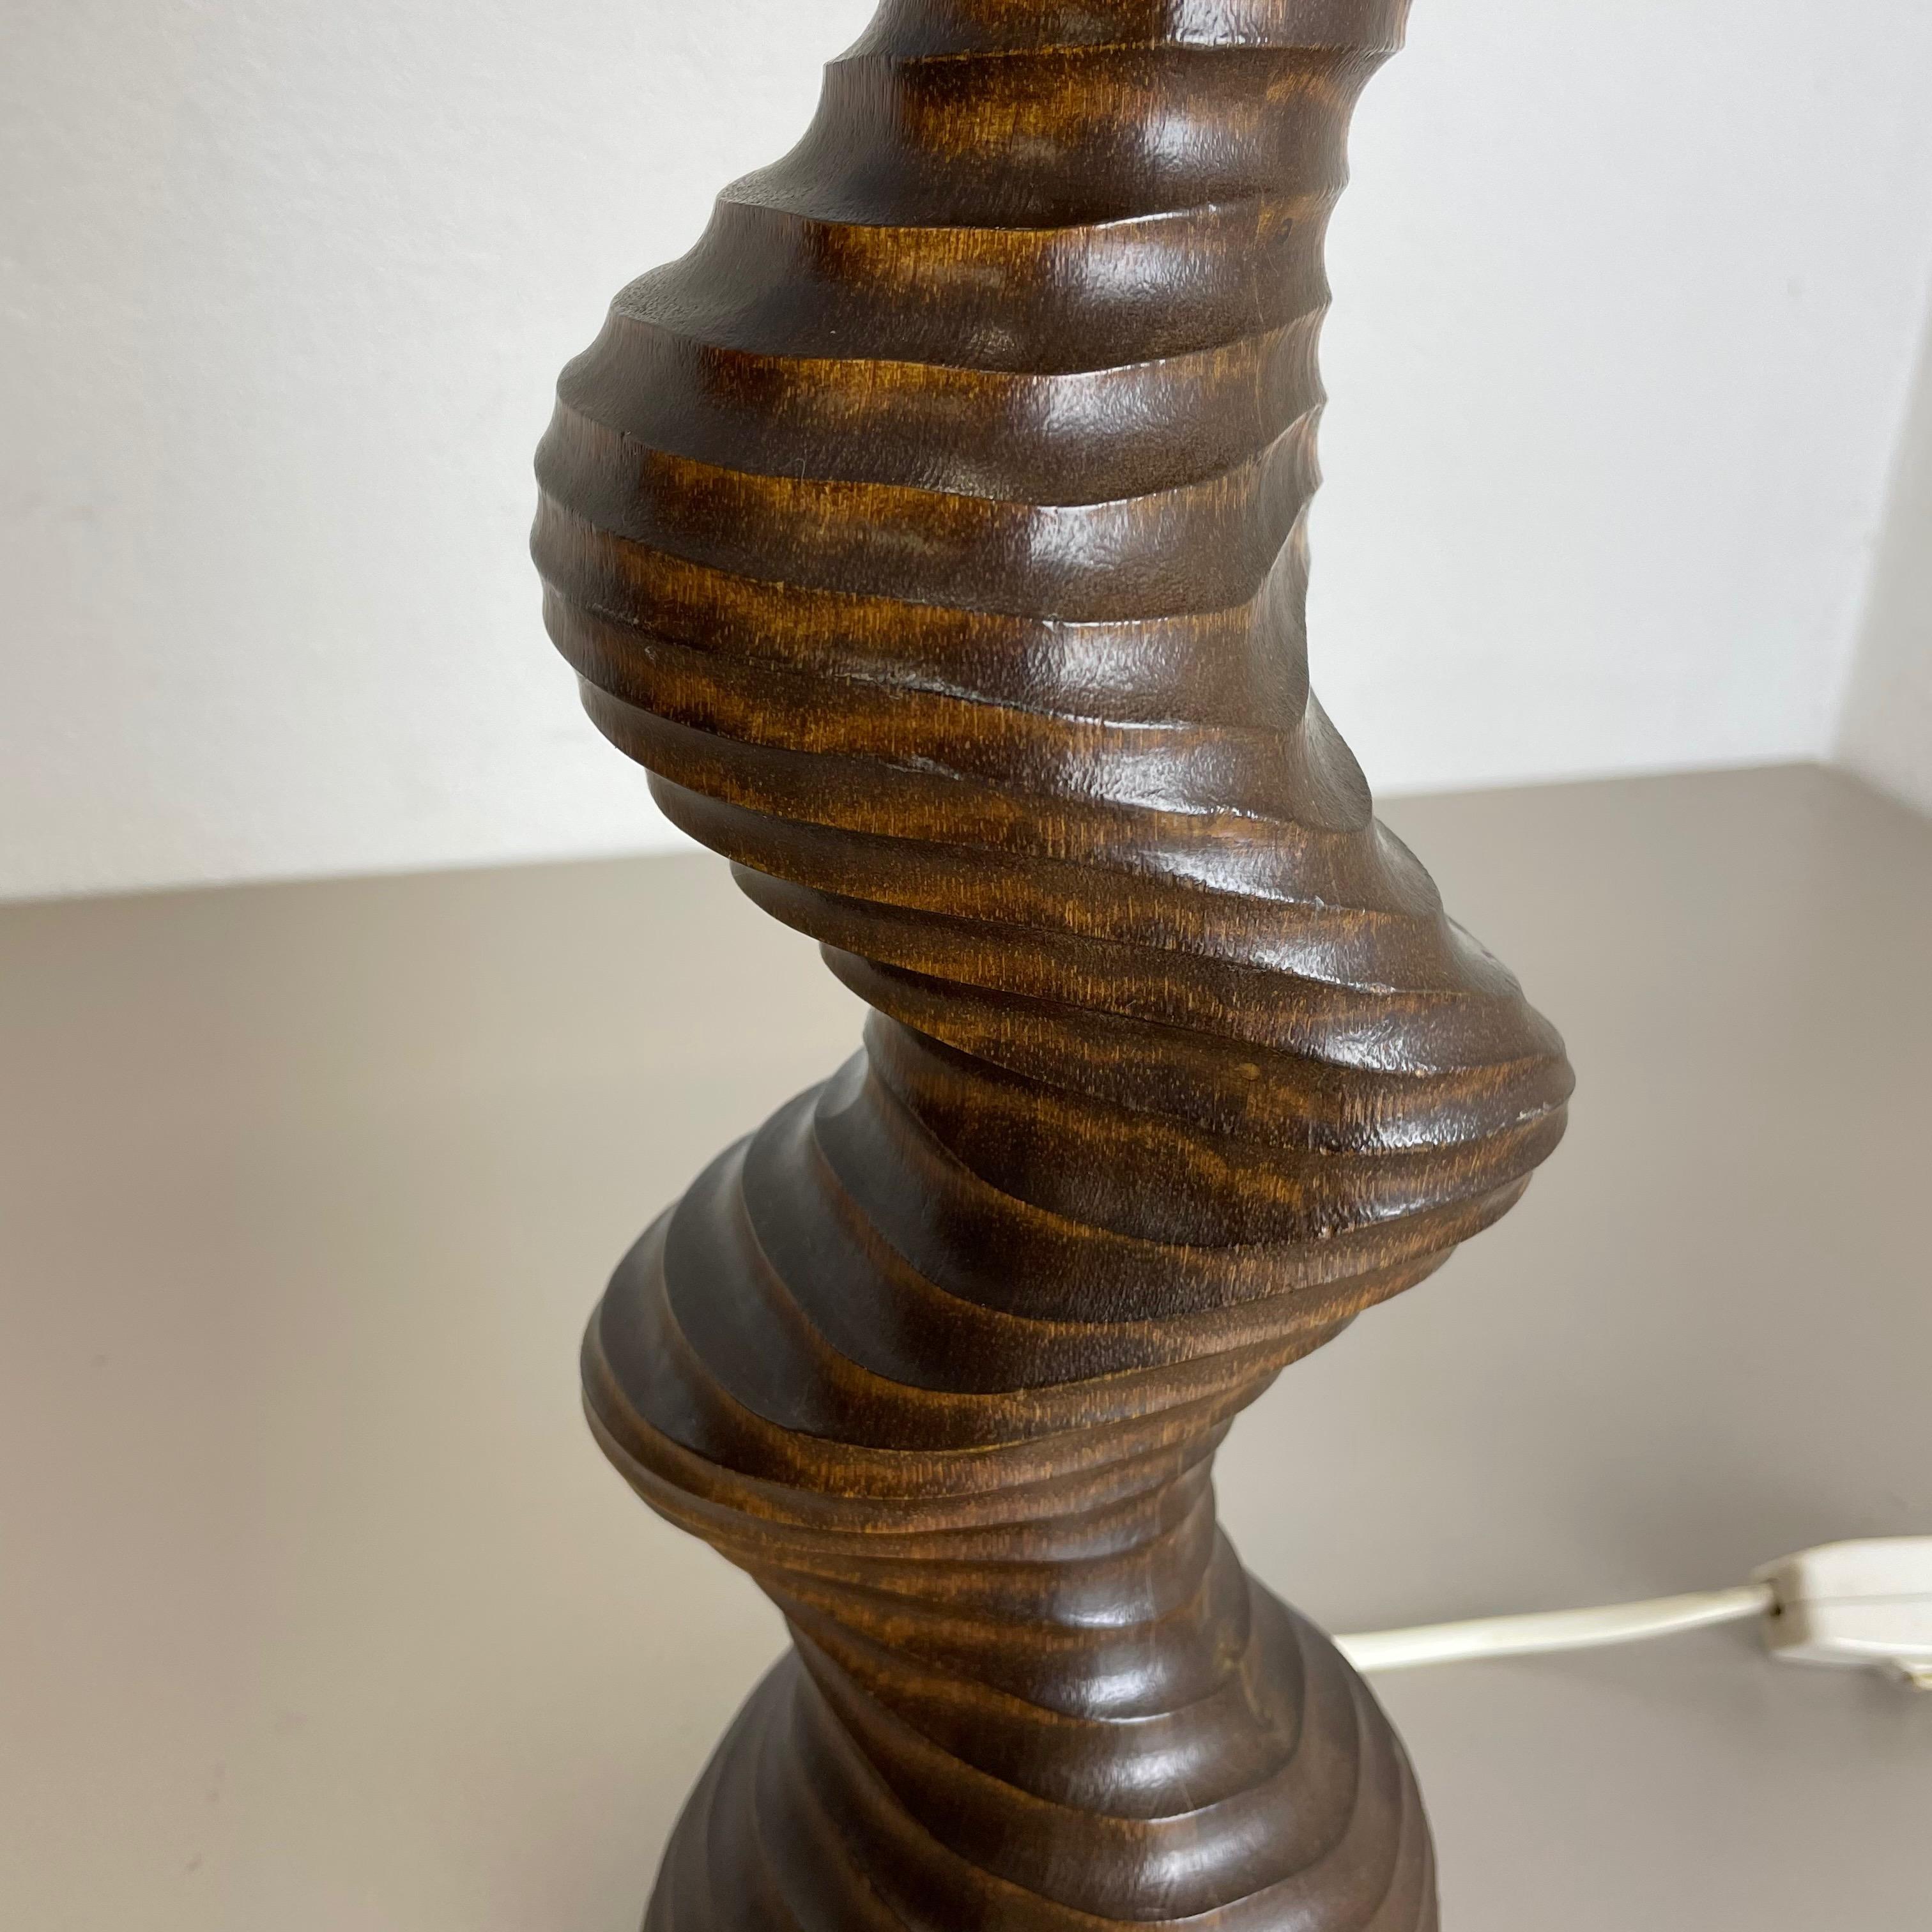 Large Organic Sculptural Wooden Table Light Made Temde Lights, Germany, 1970s For Sale 7